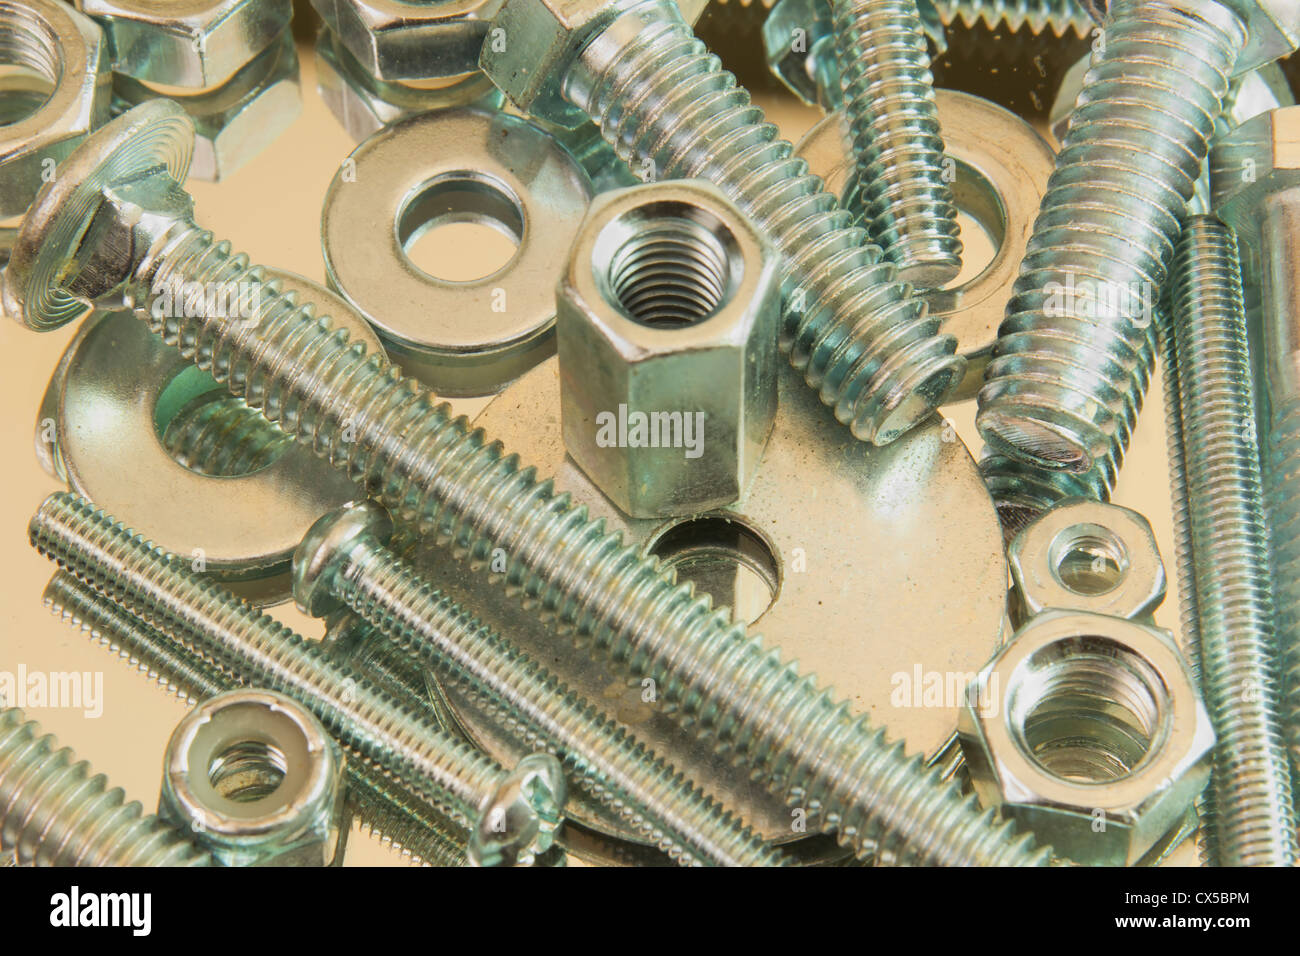 closeup of an assortment of bolts, nuts, and washers Stock Photo